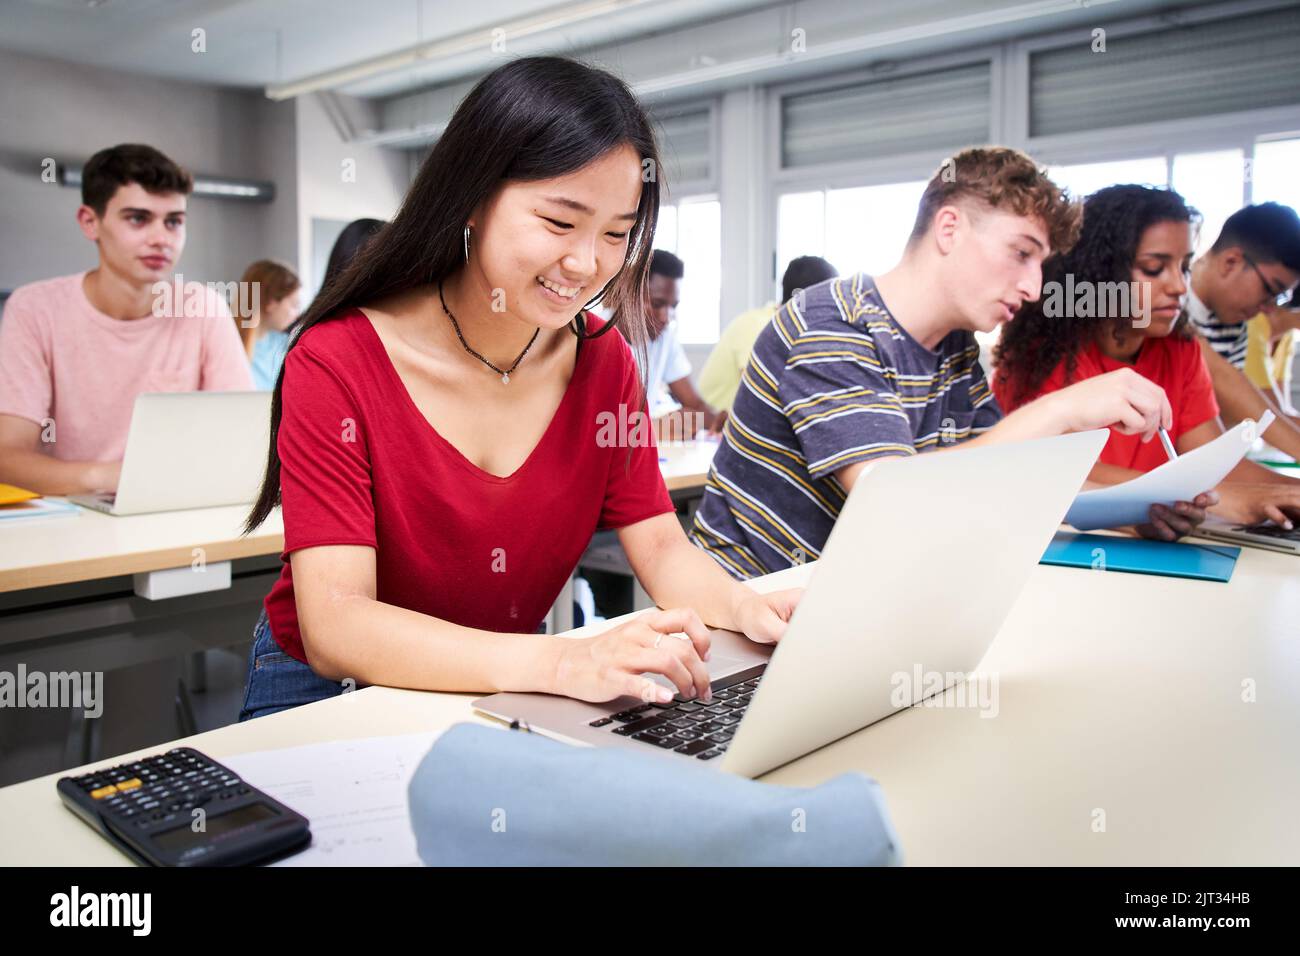 Cheerful Smiling Asian high school student girl using a laptop computer at class. A group of happy classmates in classroom. Education and technology Stock Photo